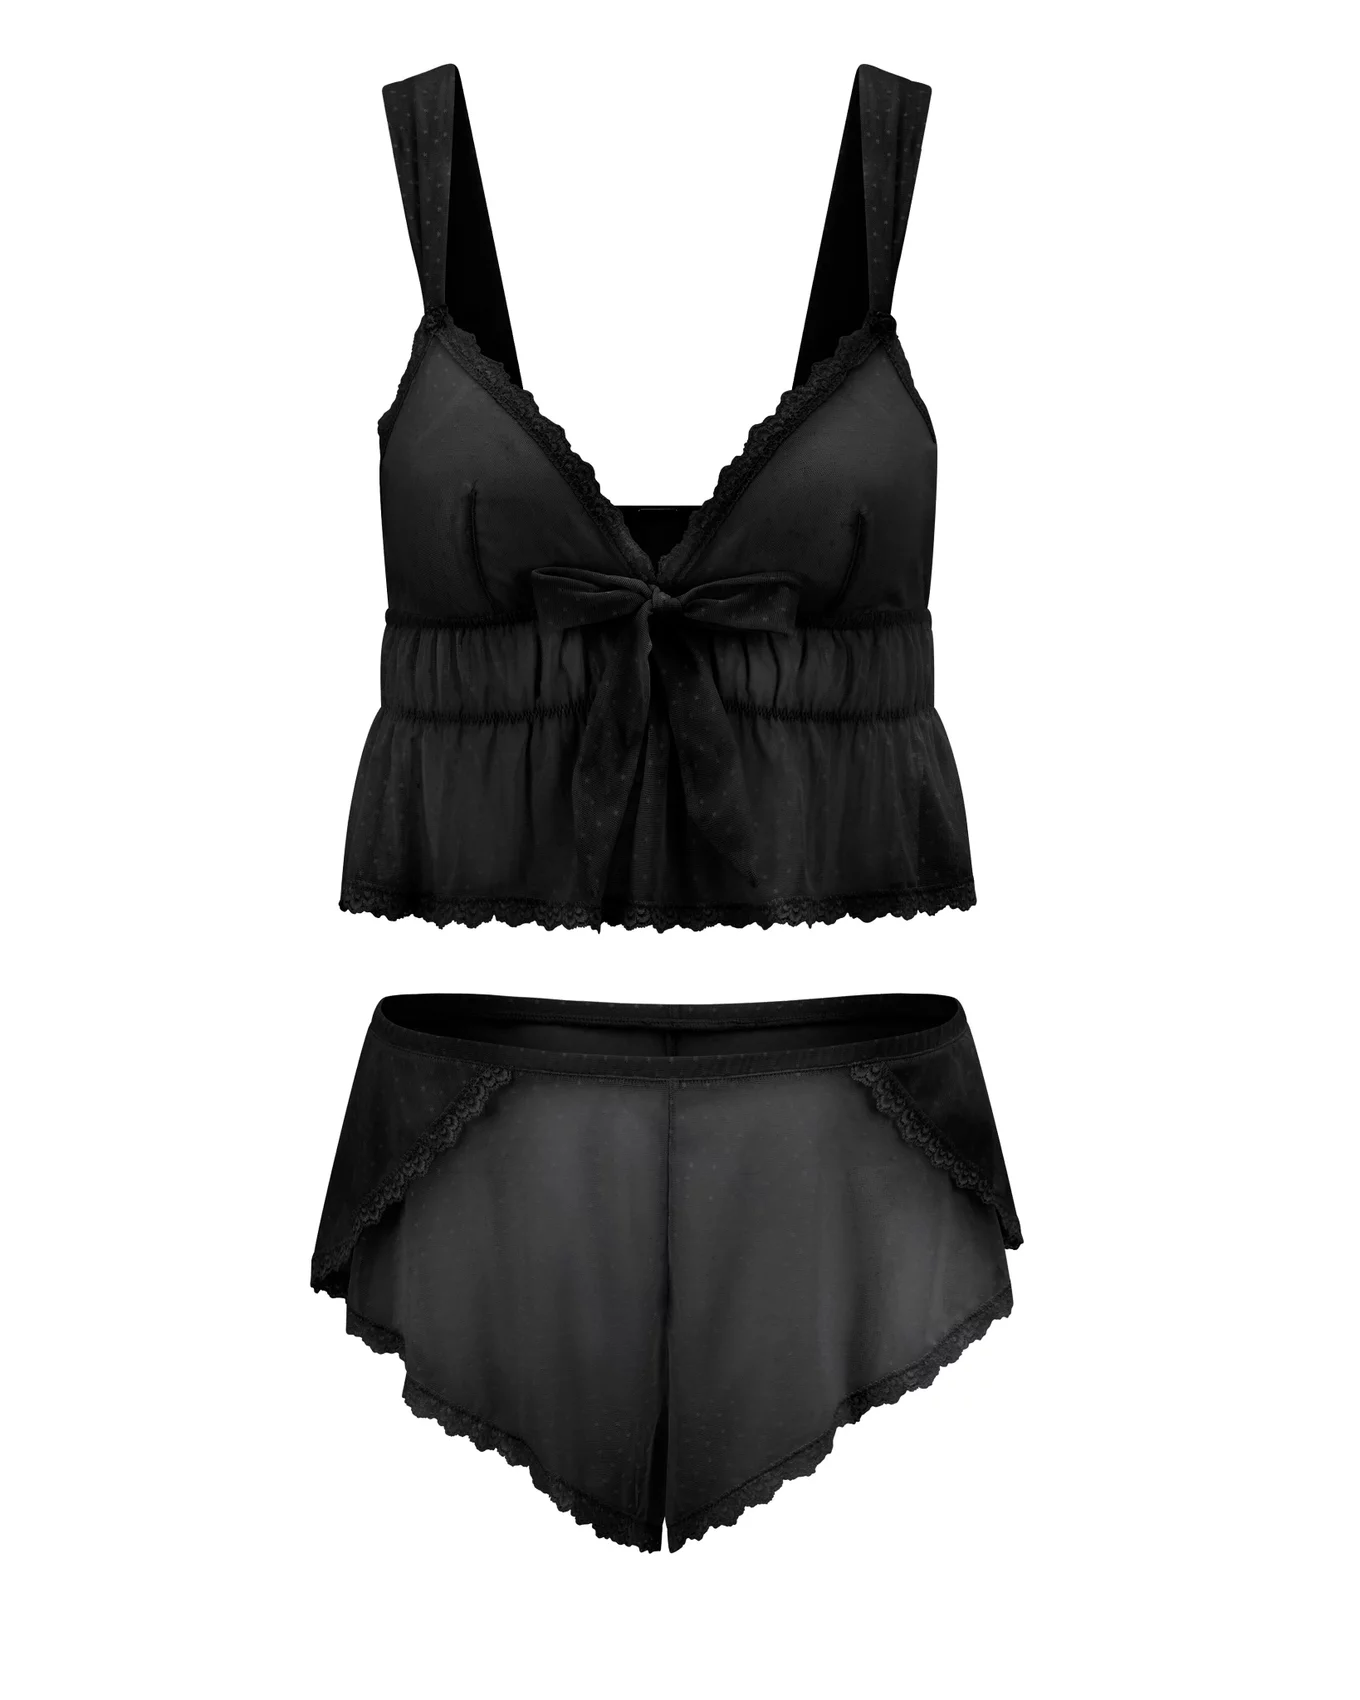 Betty Lou Black Camisole and Short Set, XS-XL